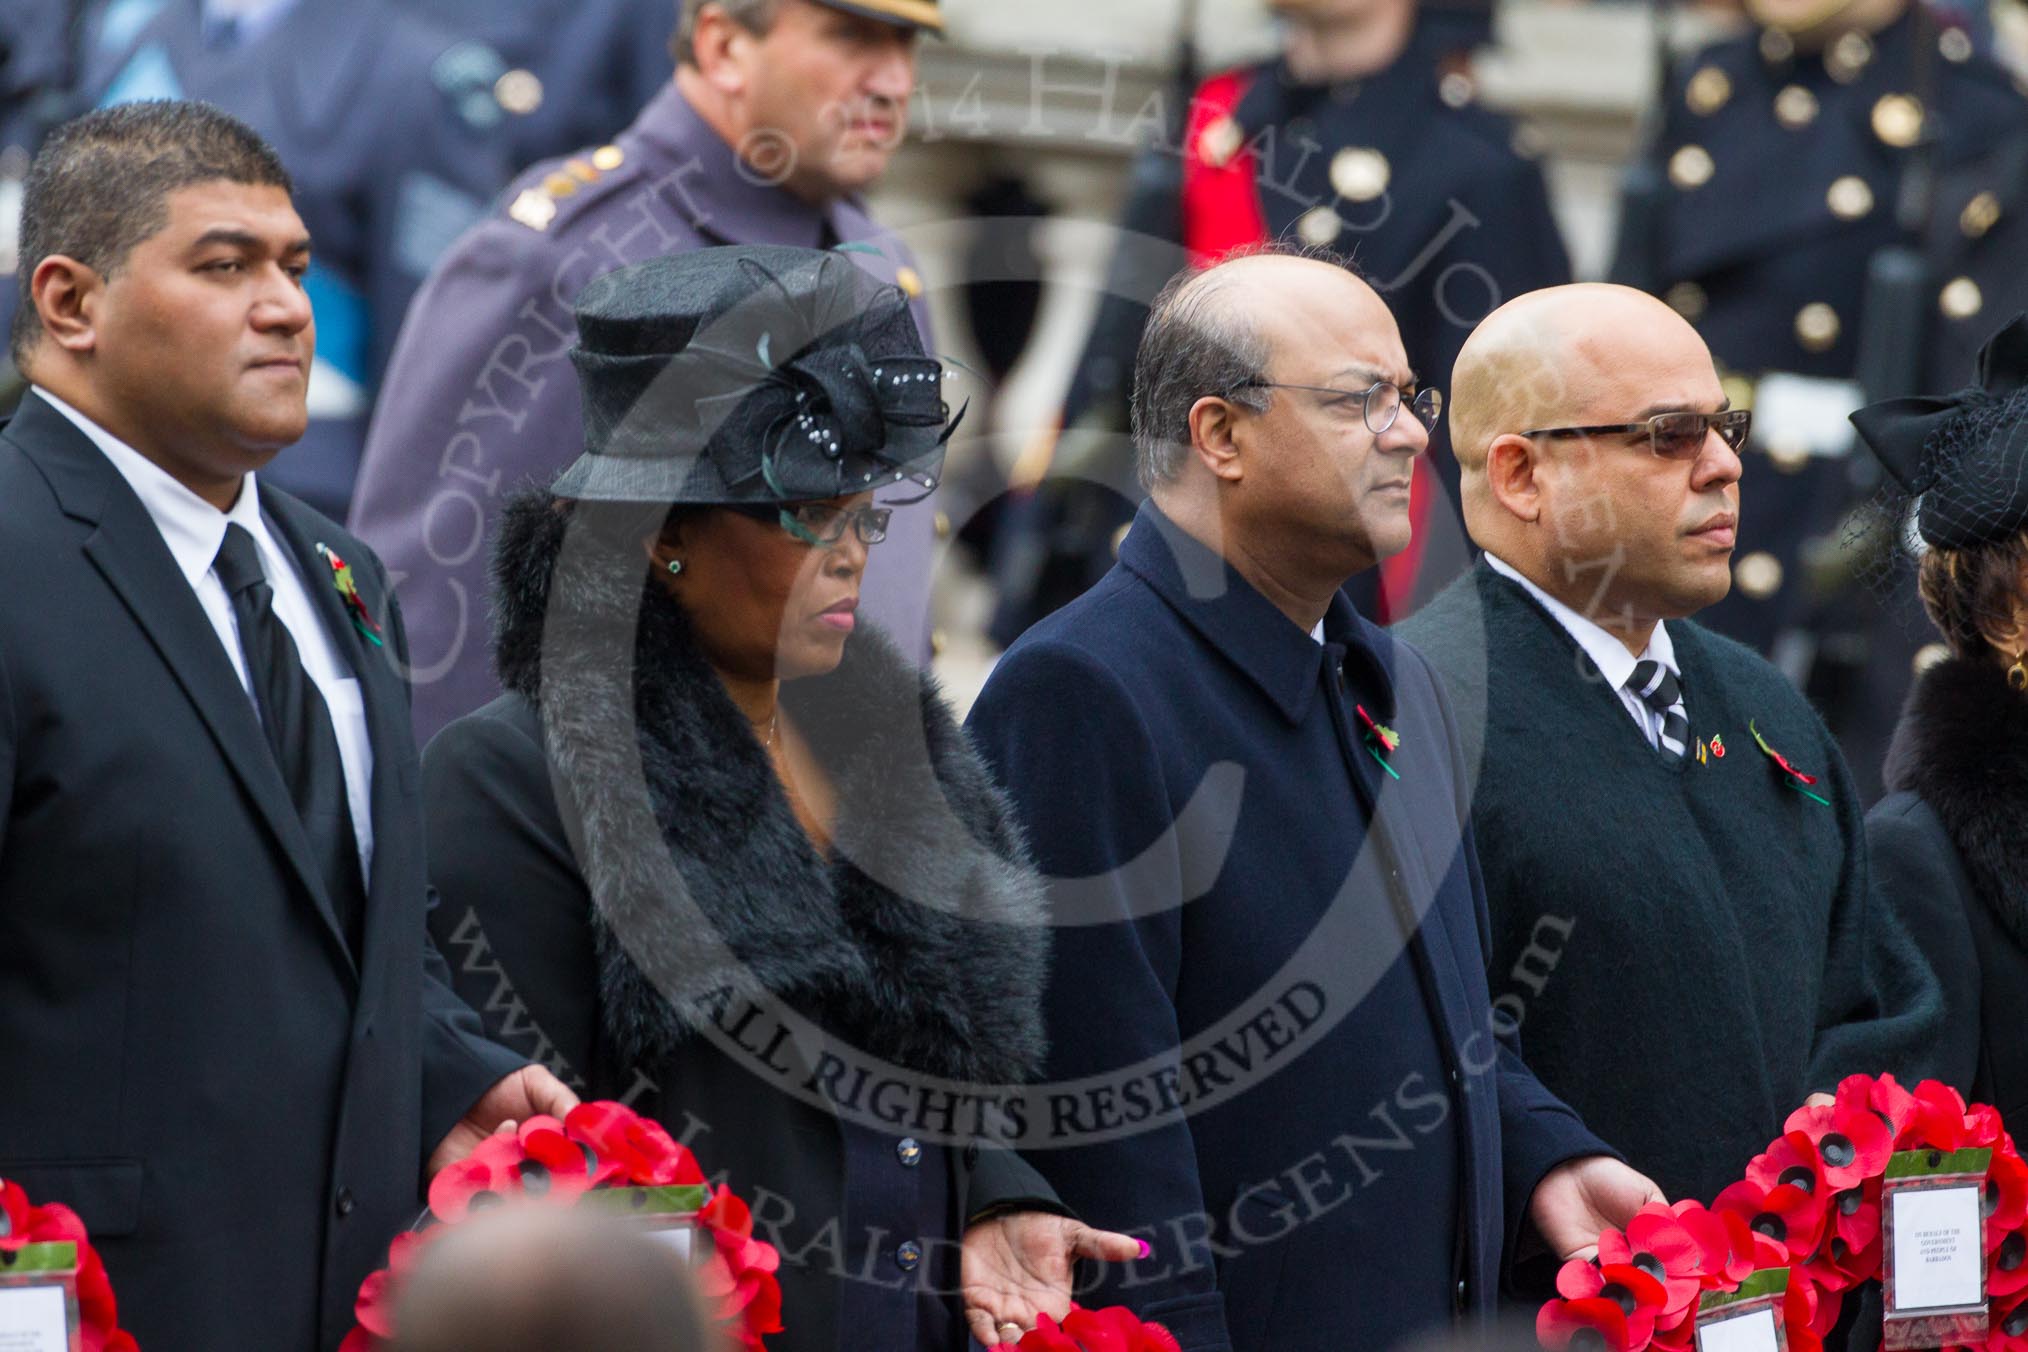 Remembrance Sunday at the Cenotaph in London 2014: The High Commissioner of Tonga, the High Commissioner of Swaziland, the High Commissioner of Mauritius and the High Commissioner of Barbados with their wreaths at the Cenotaph.
Press stand opposite the Foreign Office building, Whitehall, London SW1,
London,
Greater London,
United Kingdom,
on 09 November 2014 at 11:03, image #177